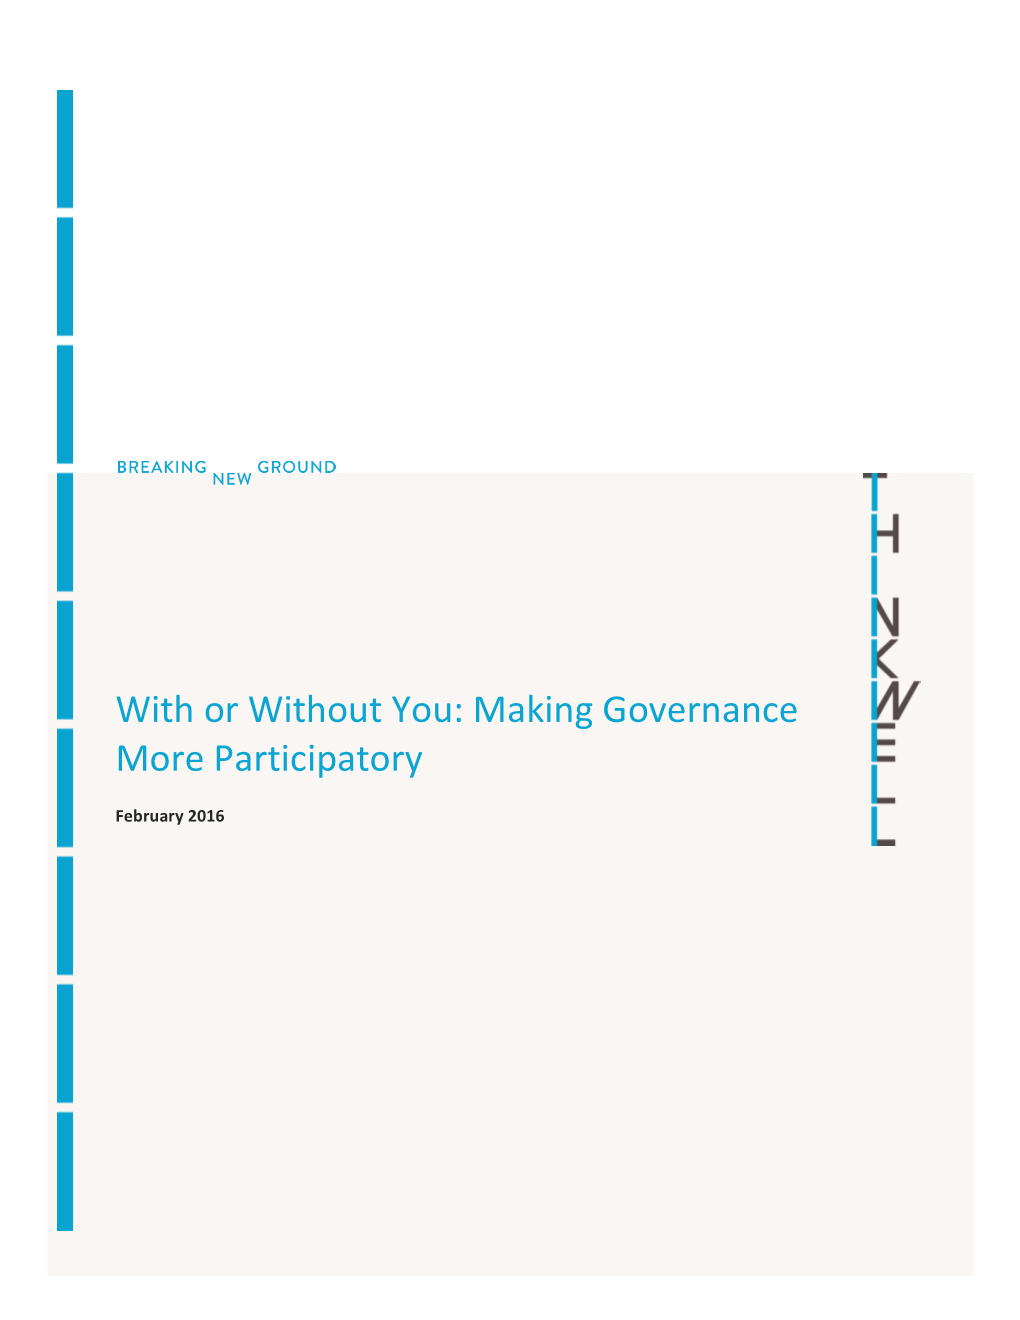 Making Governance More Participatory